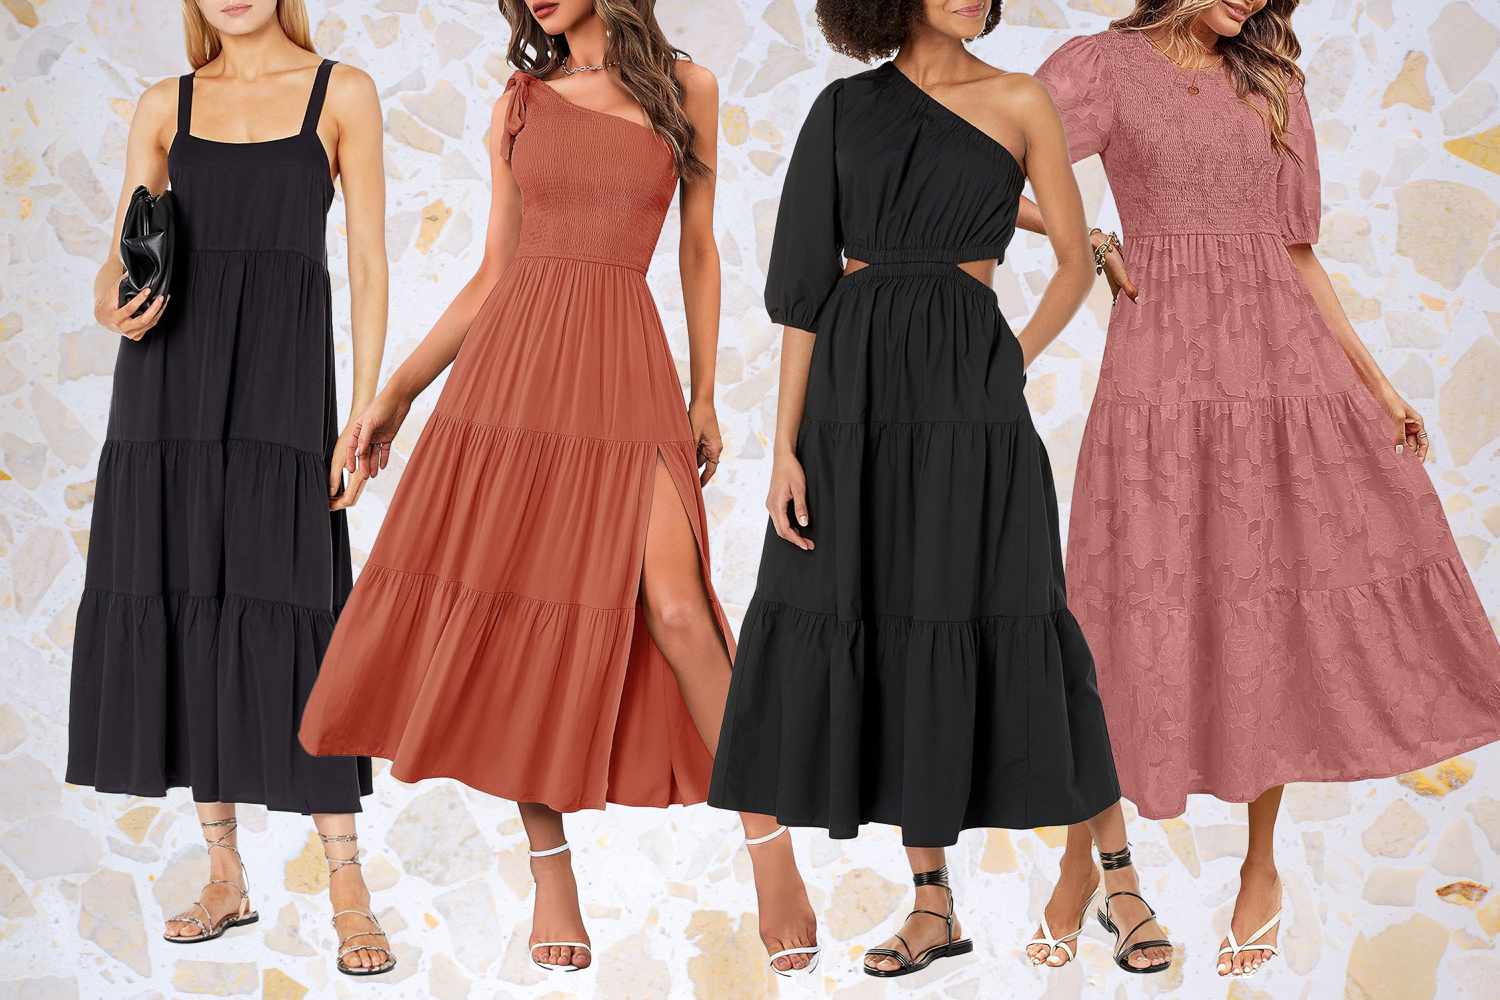 Amazon’s Memorial Day Sale Is Stocked With Summer Dresses for Every Occasion — Up to 78% Off